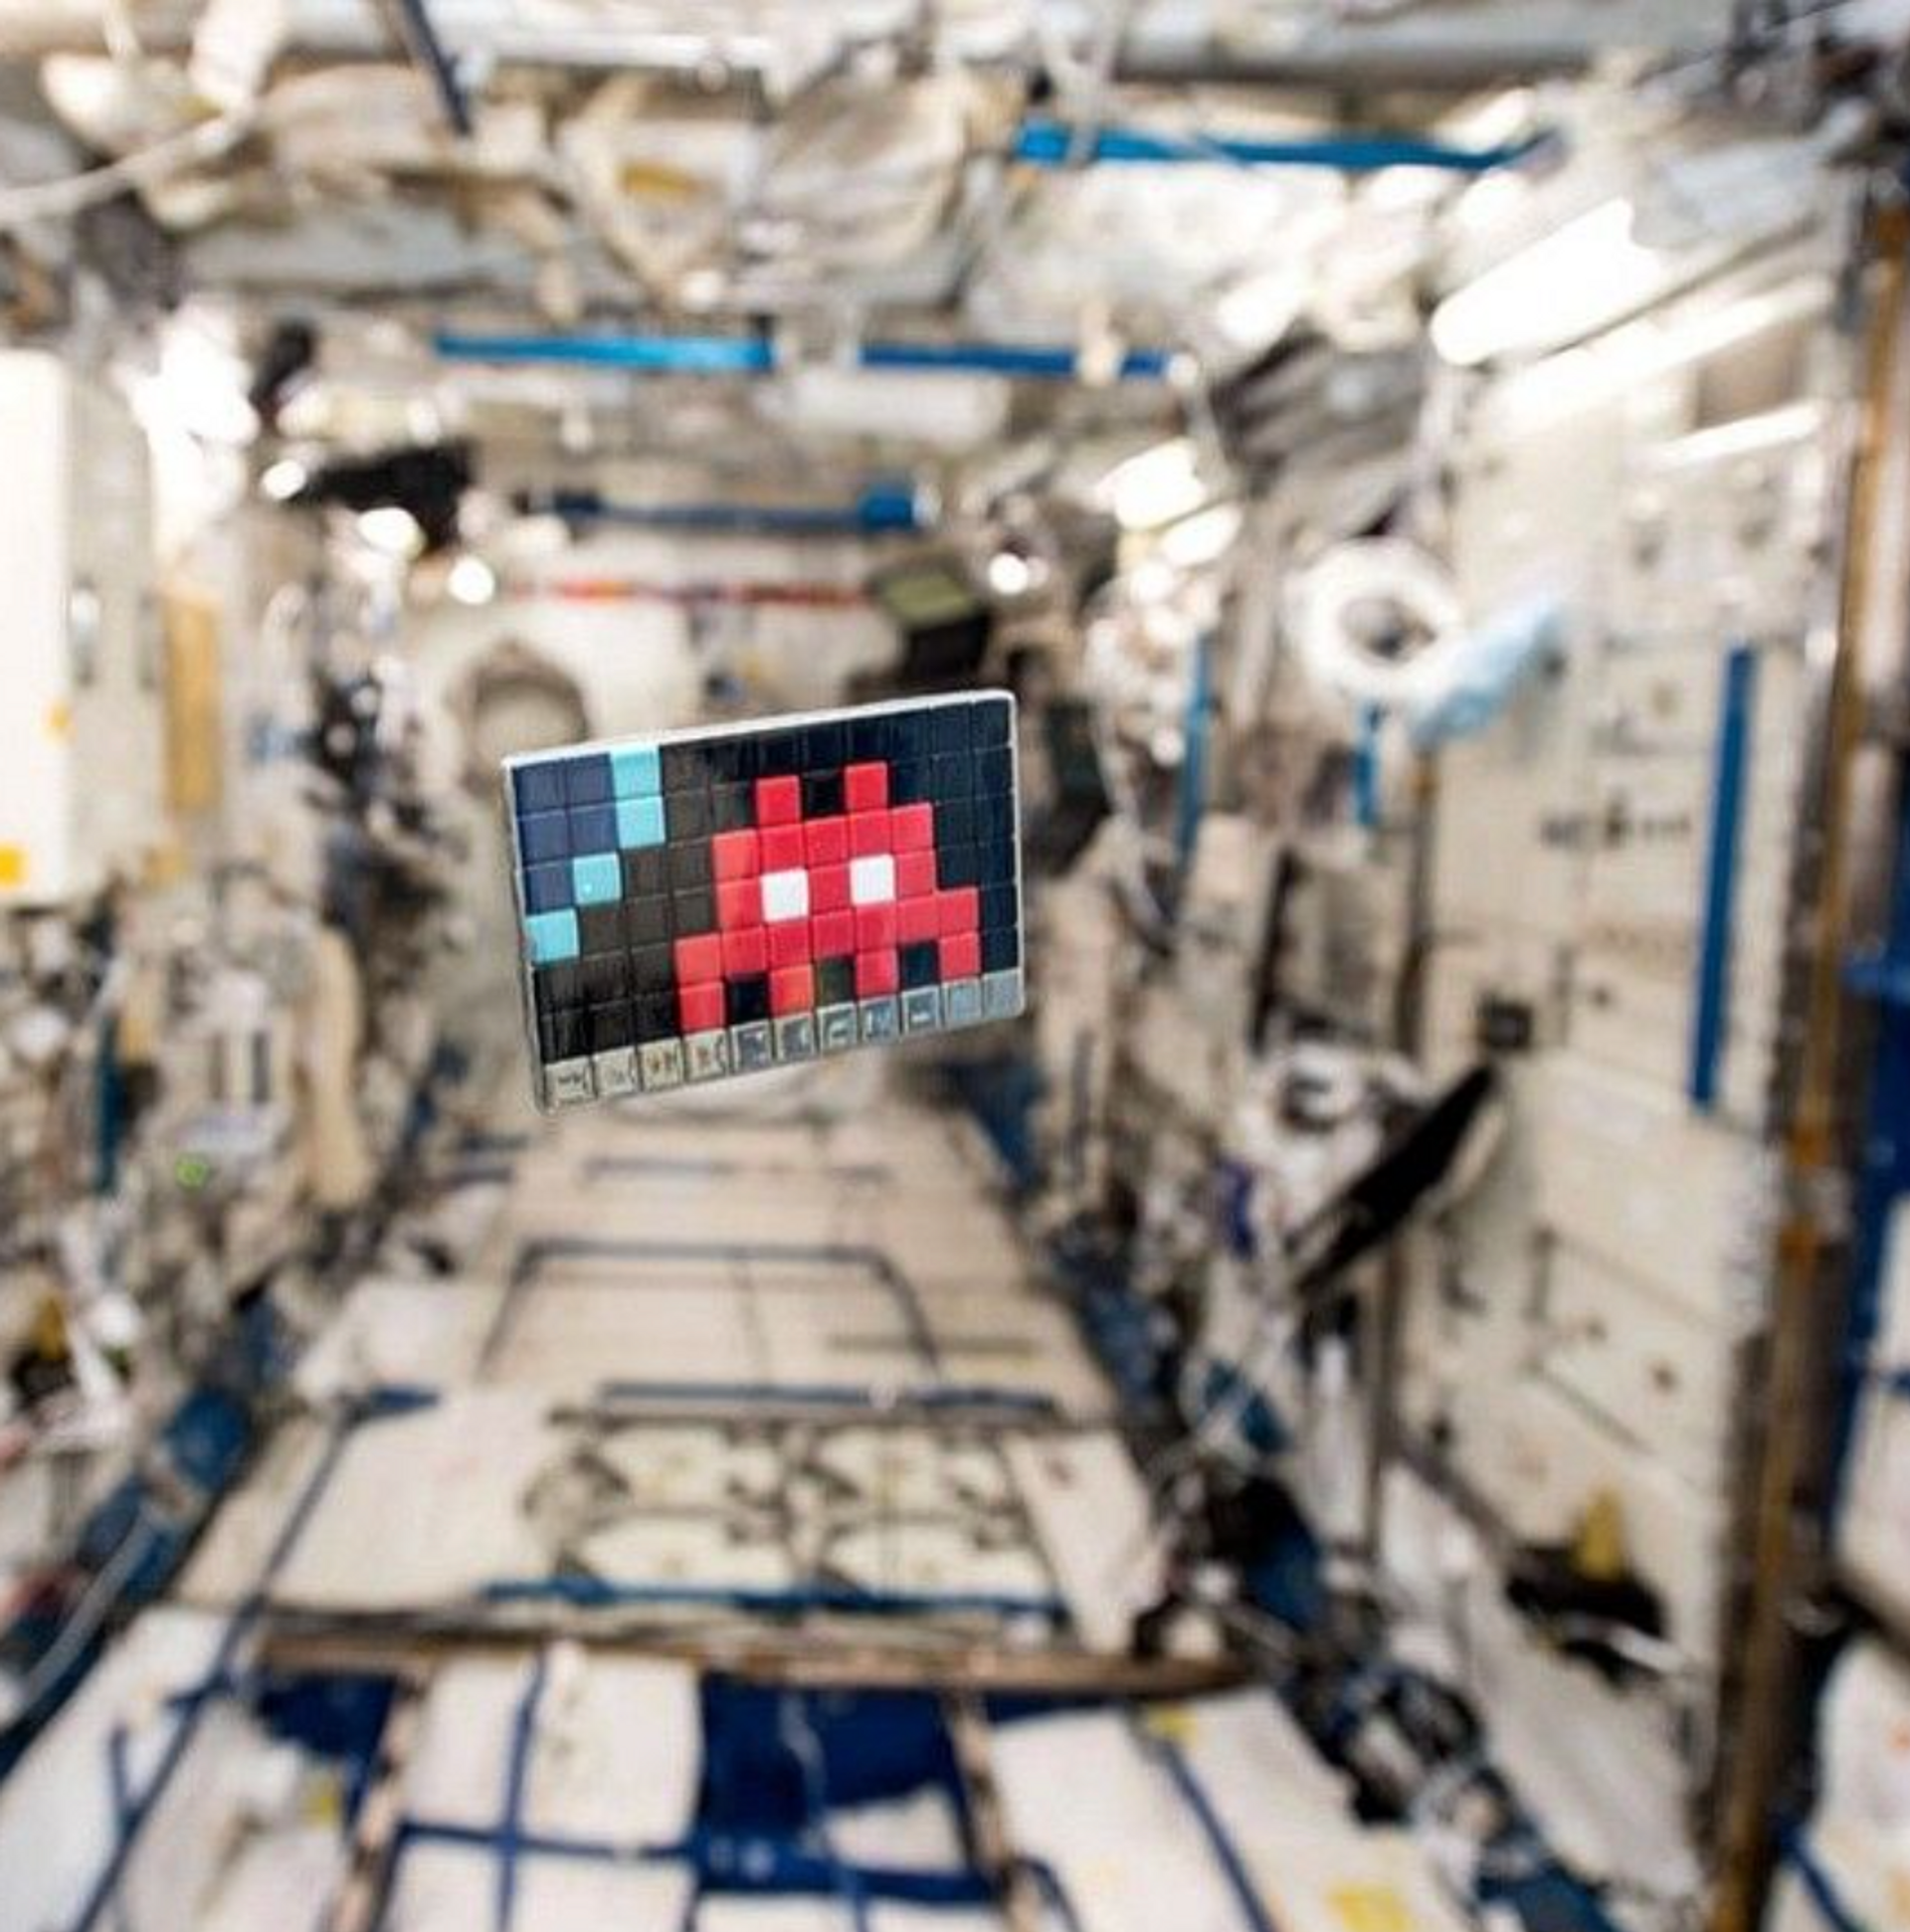 Space 2 by Invader, onboard the International Space Station